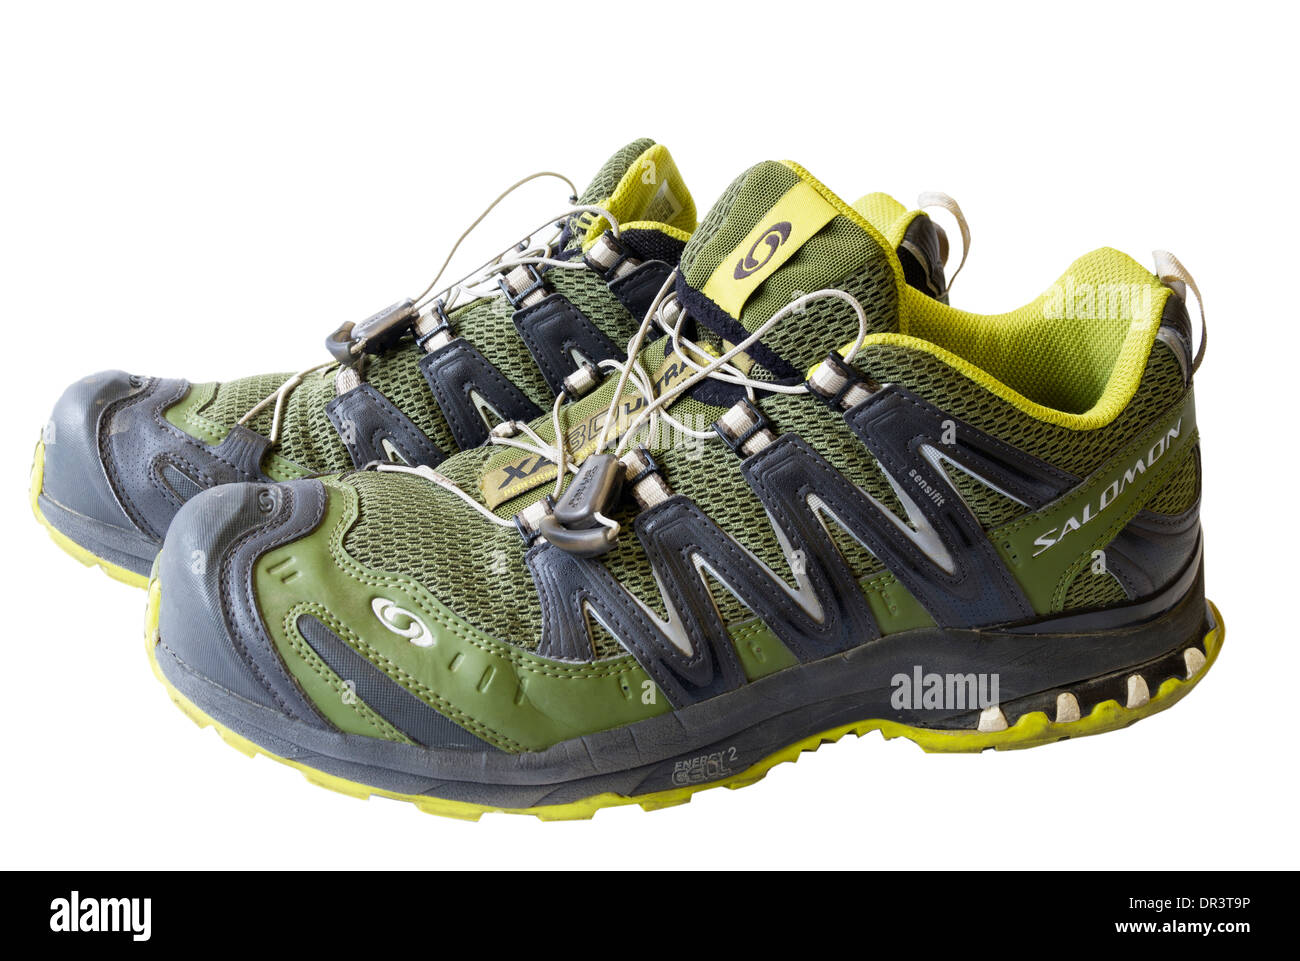 A pair of clean Salomon cross country training shoes Stock Photo - Alamy